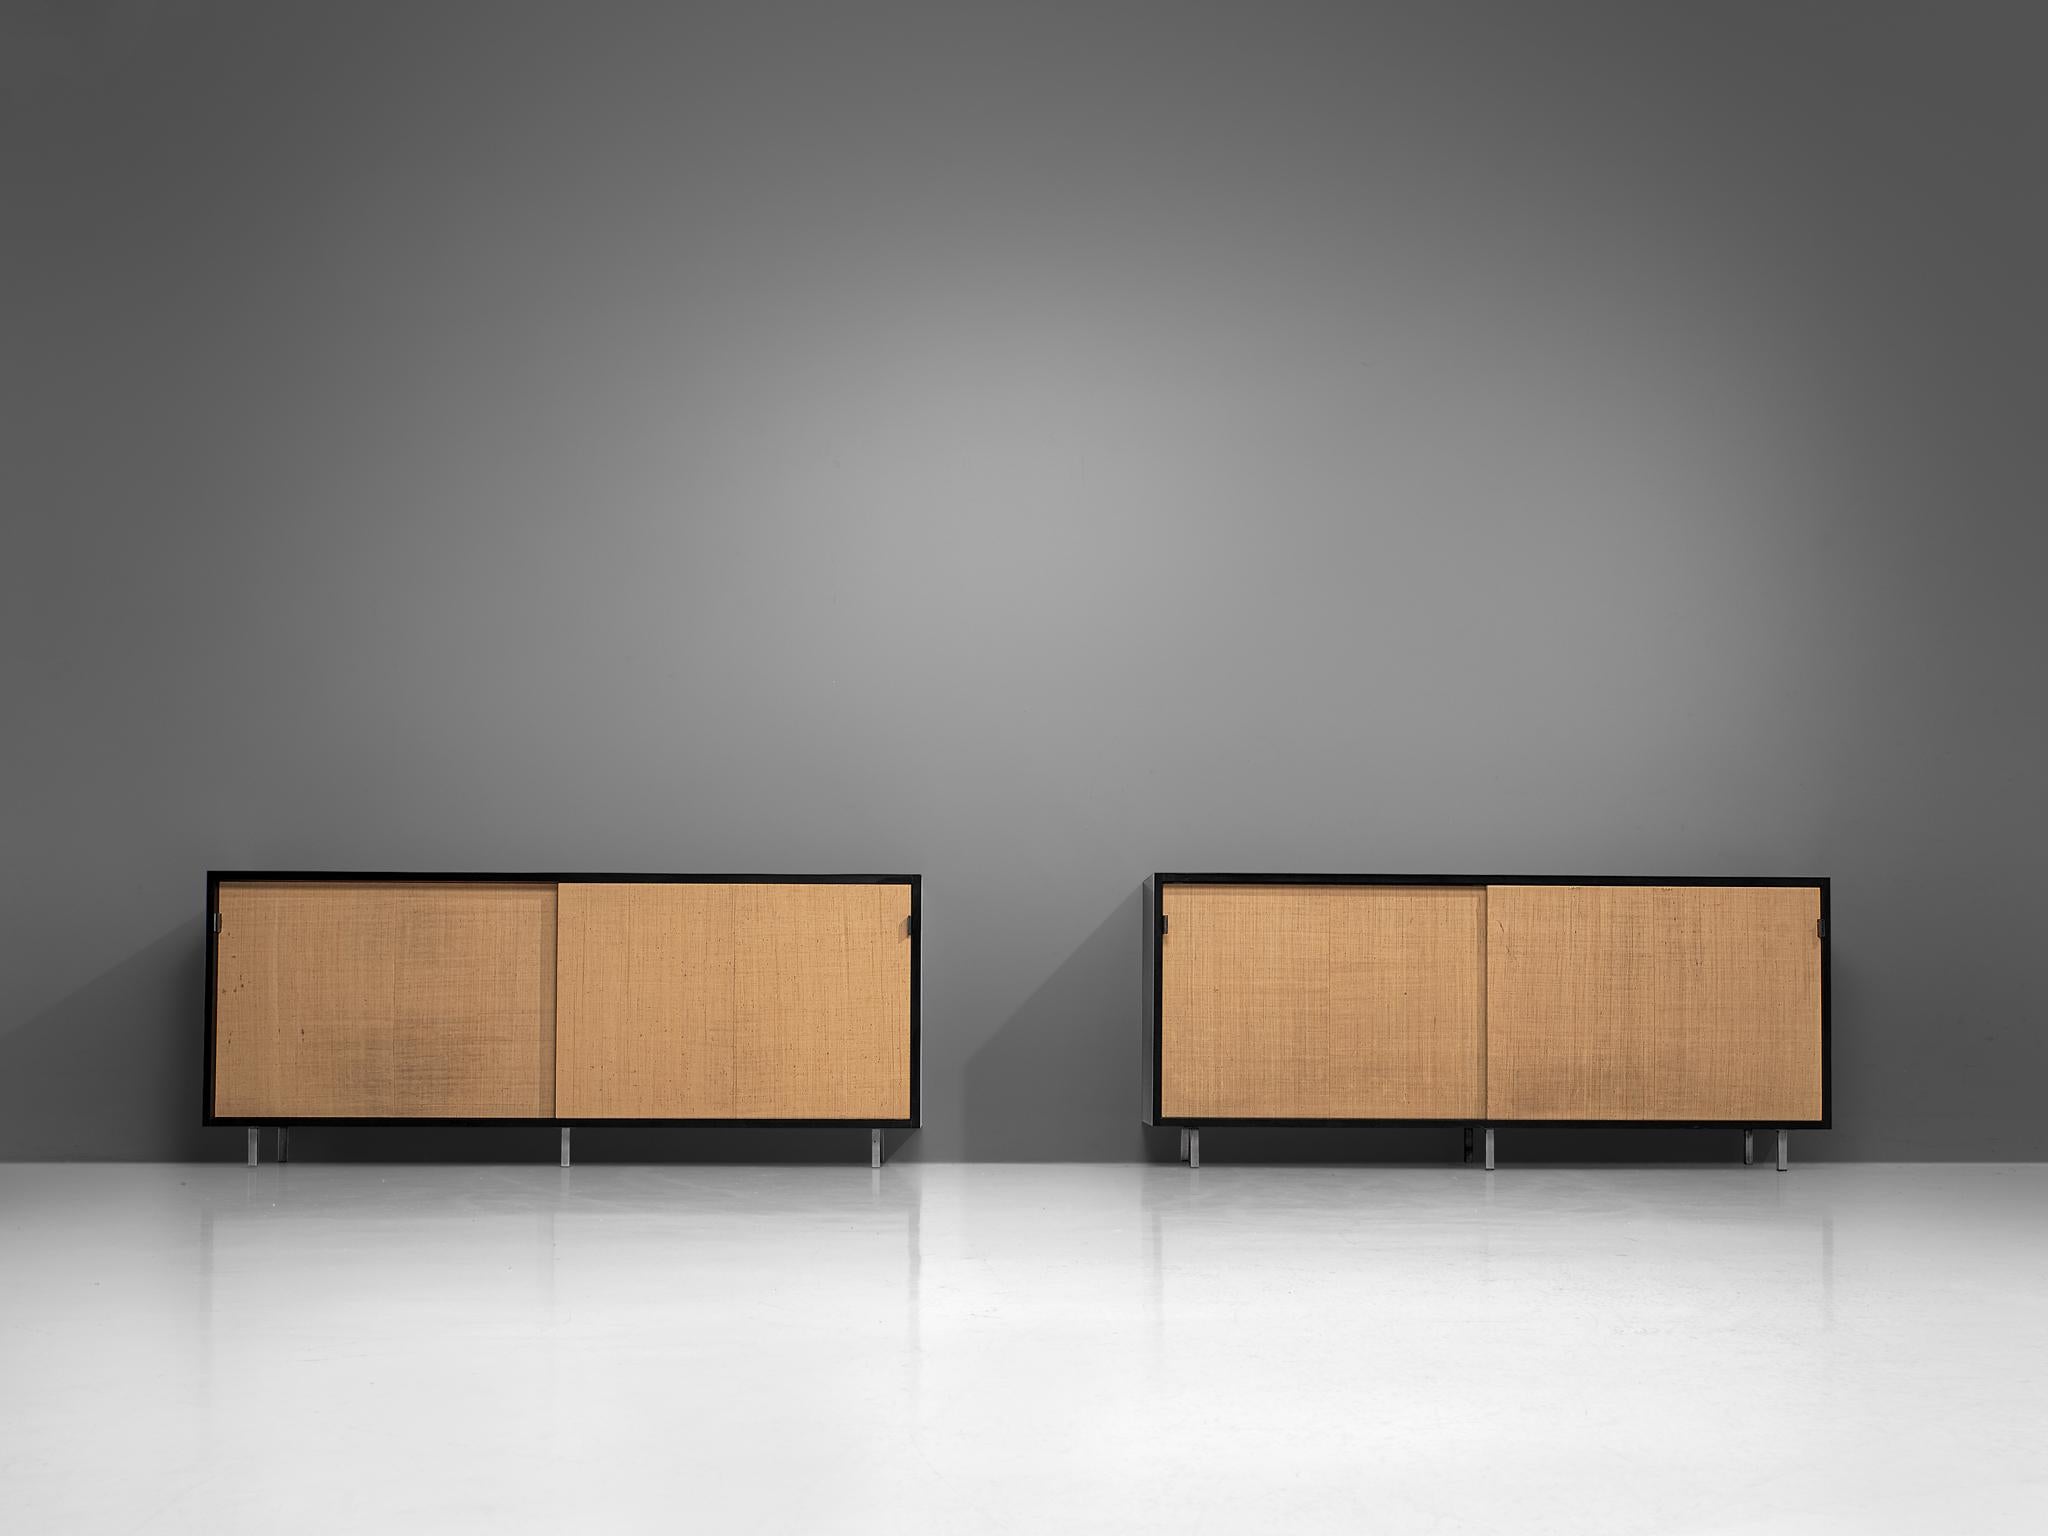 Florence Knoll for Knoll, sideboard, cane, ebonized wood, and metal, United States, 1961.

This sideboard is designed by Florence Knoll for Knoll International and was meant for the headquarters of Knoll in Italy. The credenza is executed with two